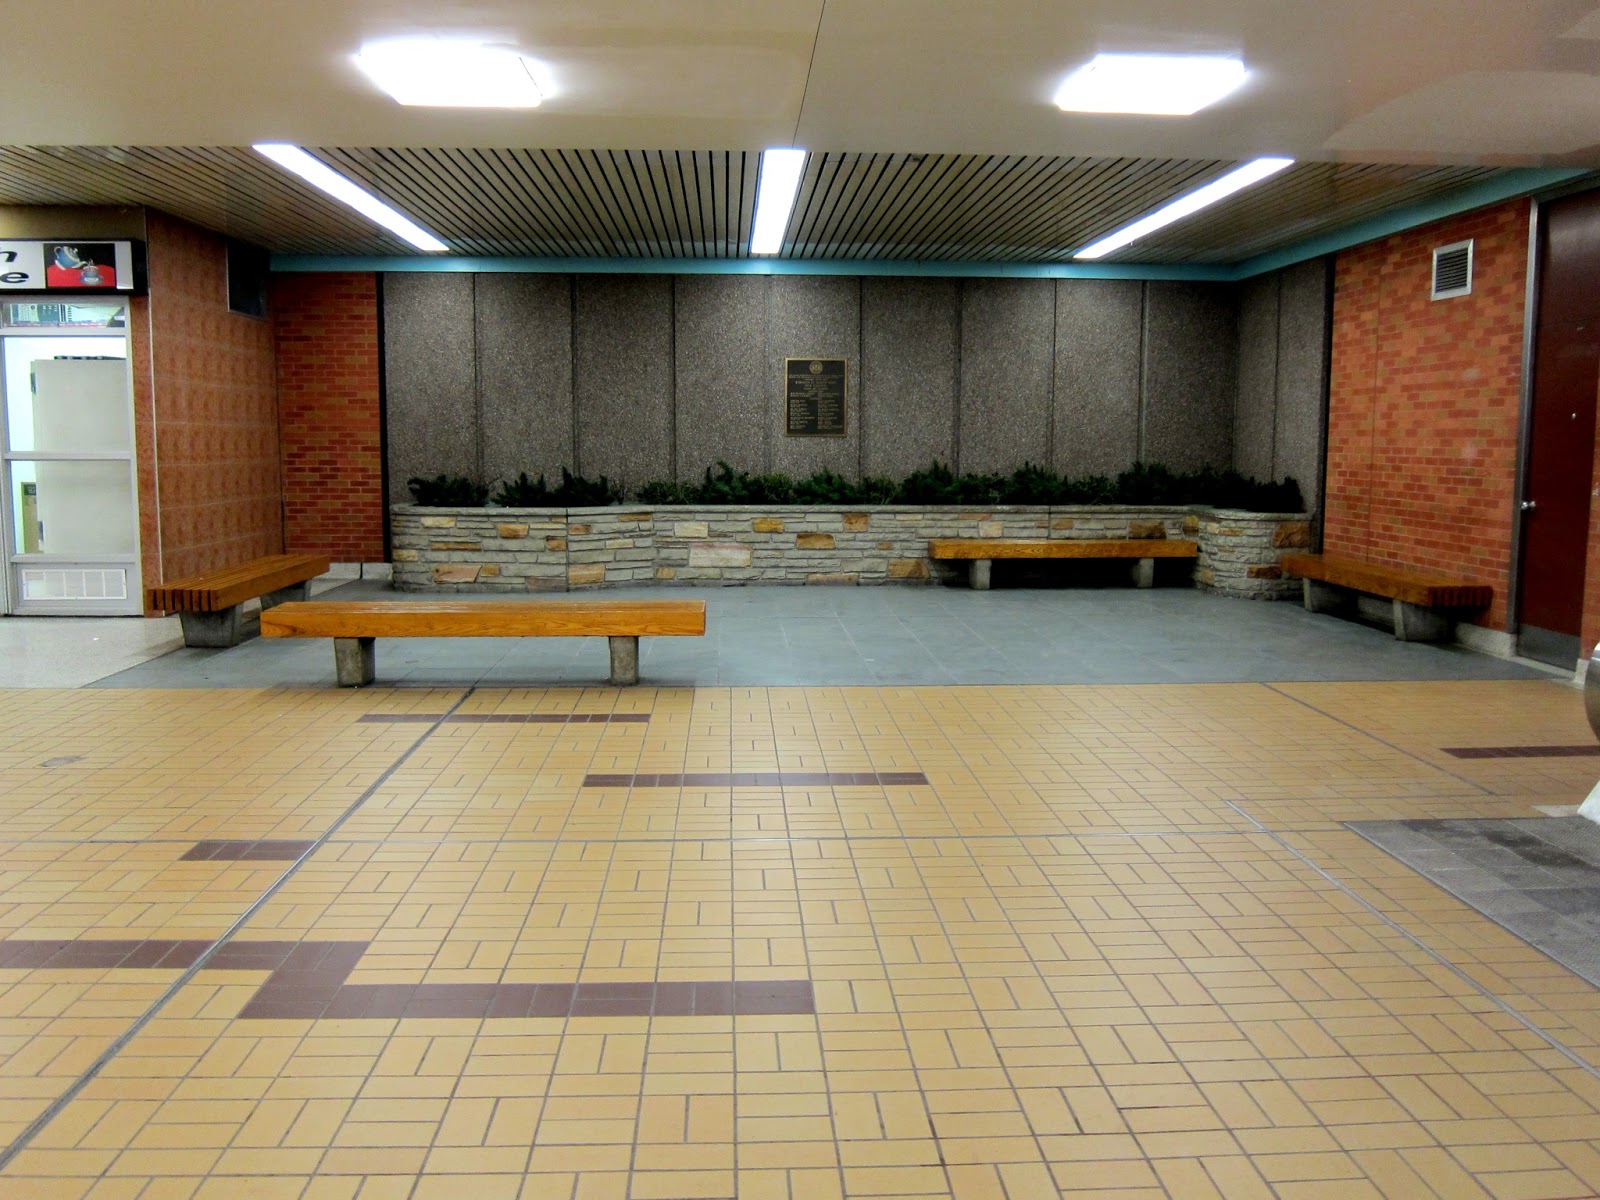 Lounge area at Wilson station